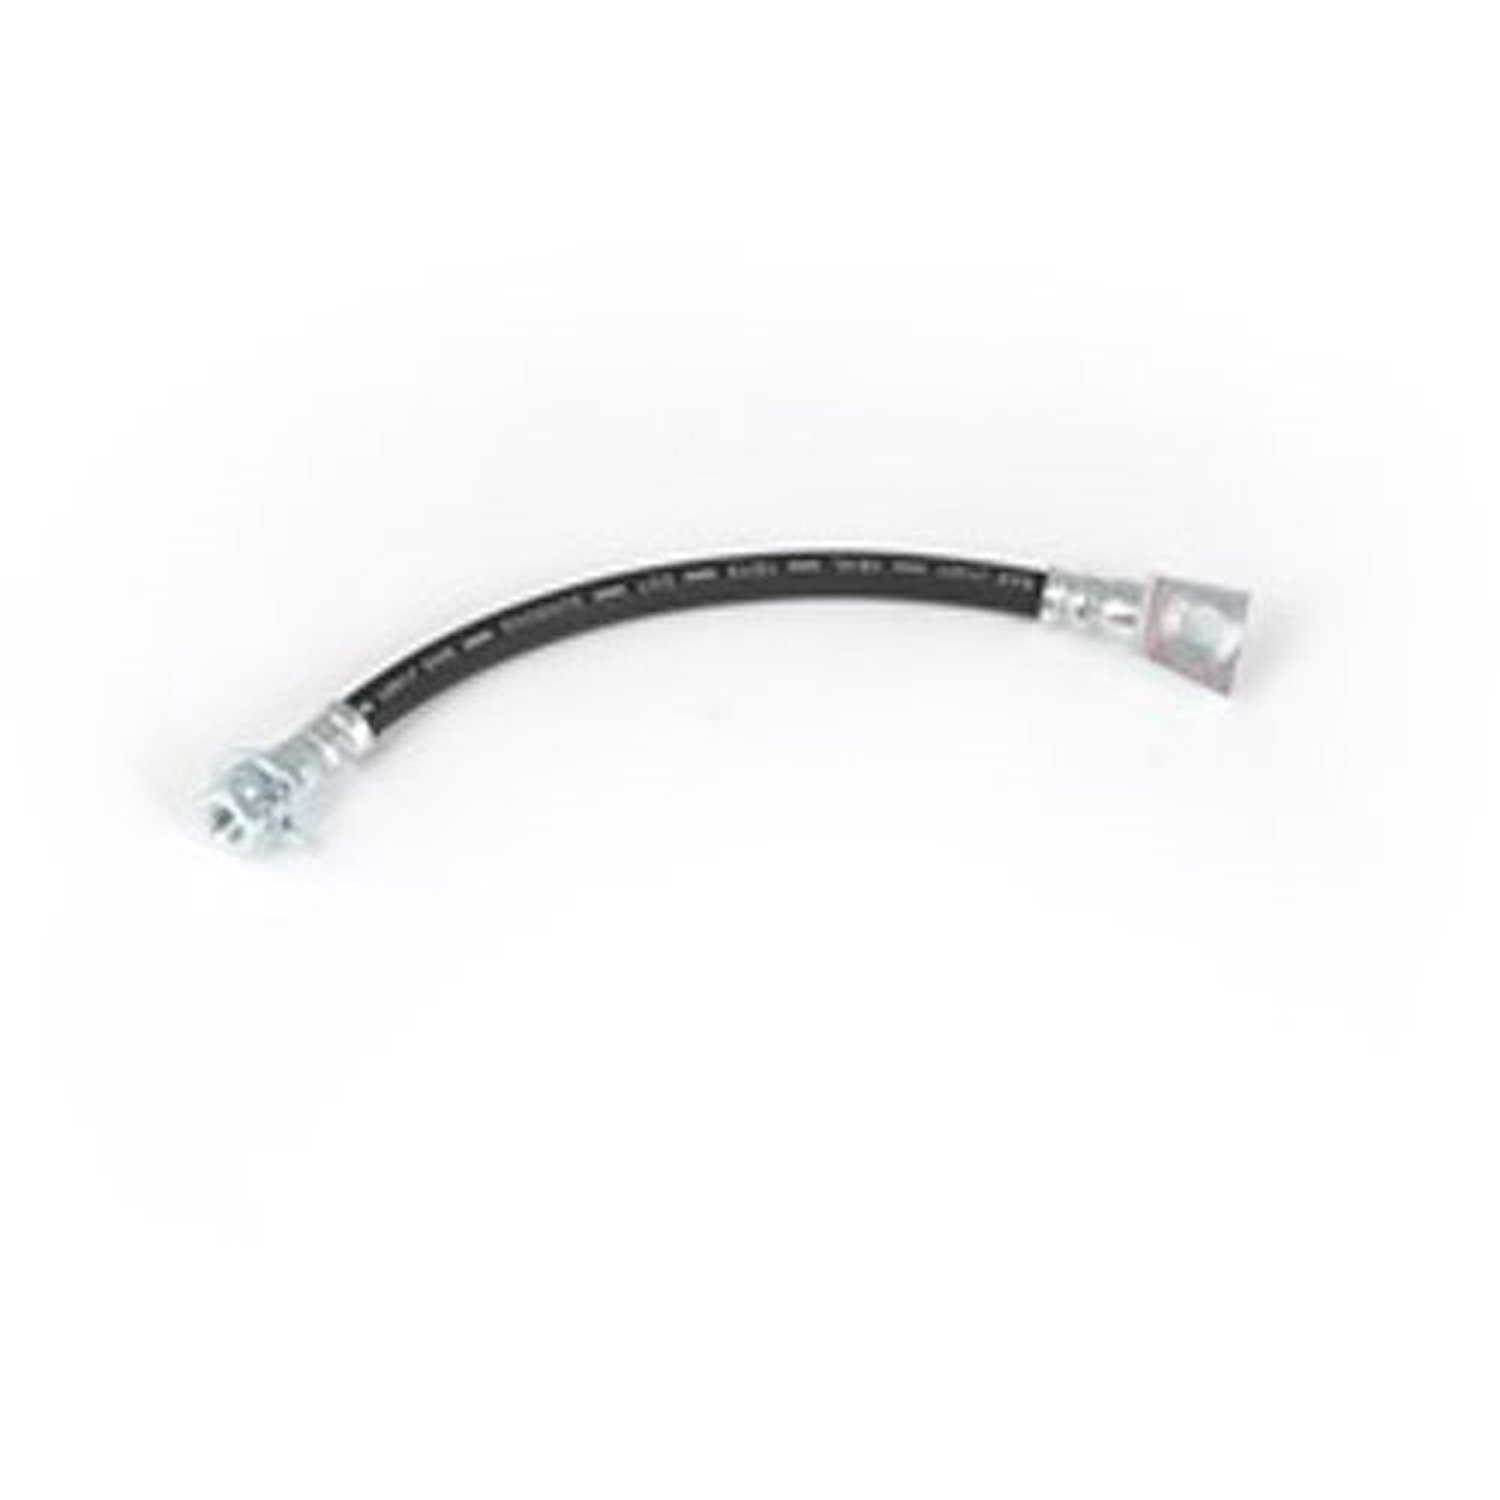 This right rear brake hose from Omix-ADA fits 03-07 Jeep Libertys with rear disc brakes.